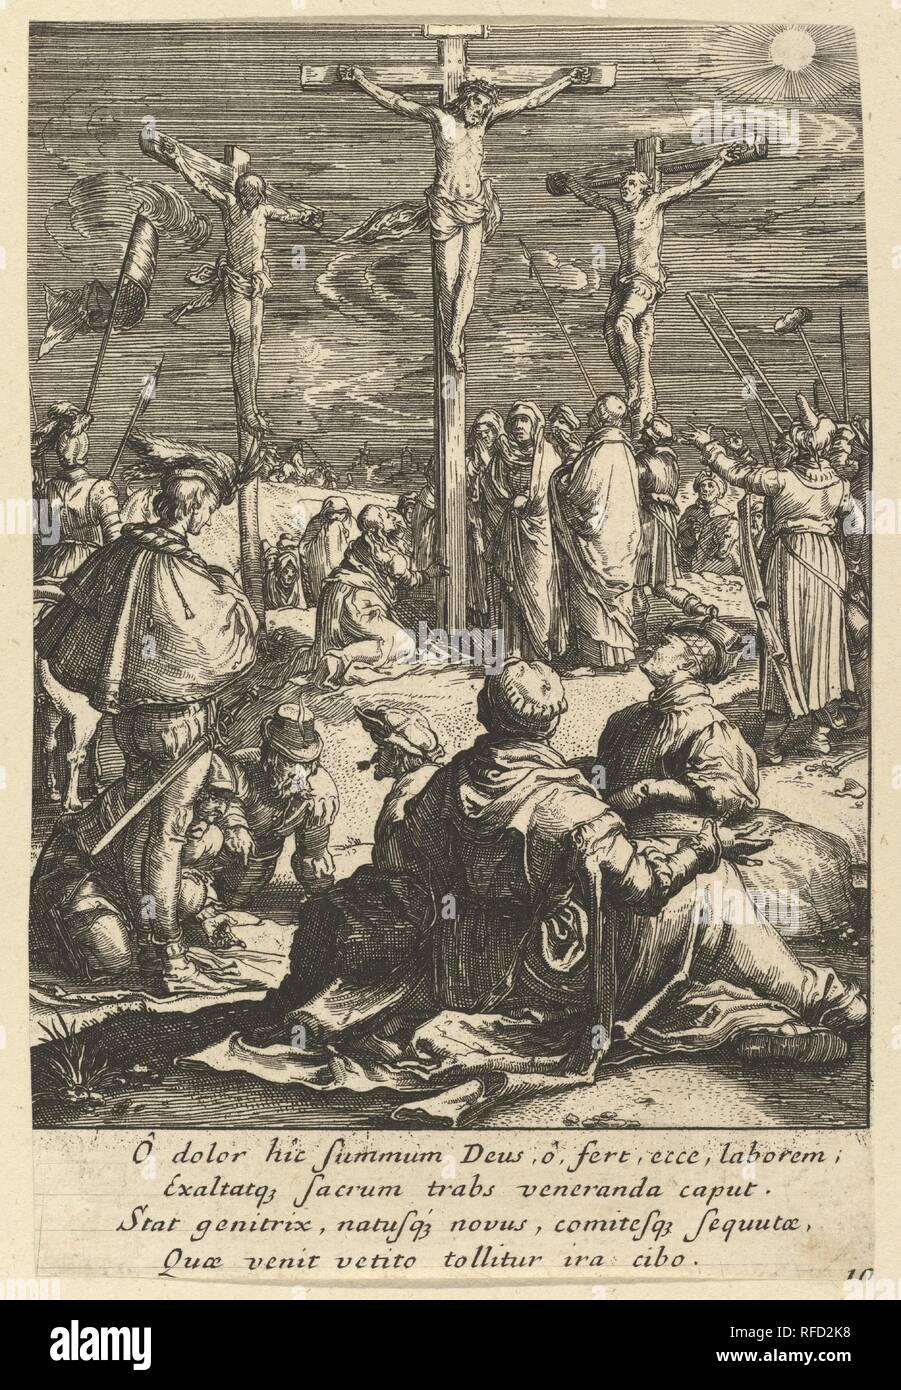 Christ on the Cross, from The Passion of Christ. Artist: After Hendrick Goltzius (Netherlandish, Mühlbracht 1558-1617 Haarlem); Nicolas Cochin (French, Troyes 1610-1686 Paris). Dimensions: Sheet: 5 3/4 x 3 7/8 in. (14.6 x 9.8 cm). Publisher: Jean I Leblond (French, ca. 1590-1666 Paris). Date: mid 17th century. Museum: Metropolitan Museum of Art, New York, USA. Stock Photo